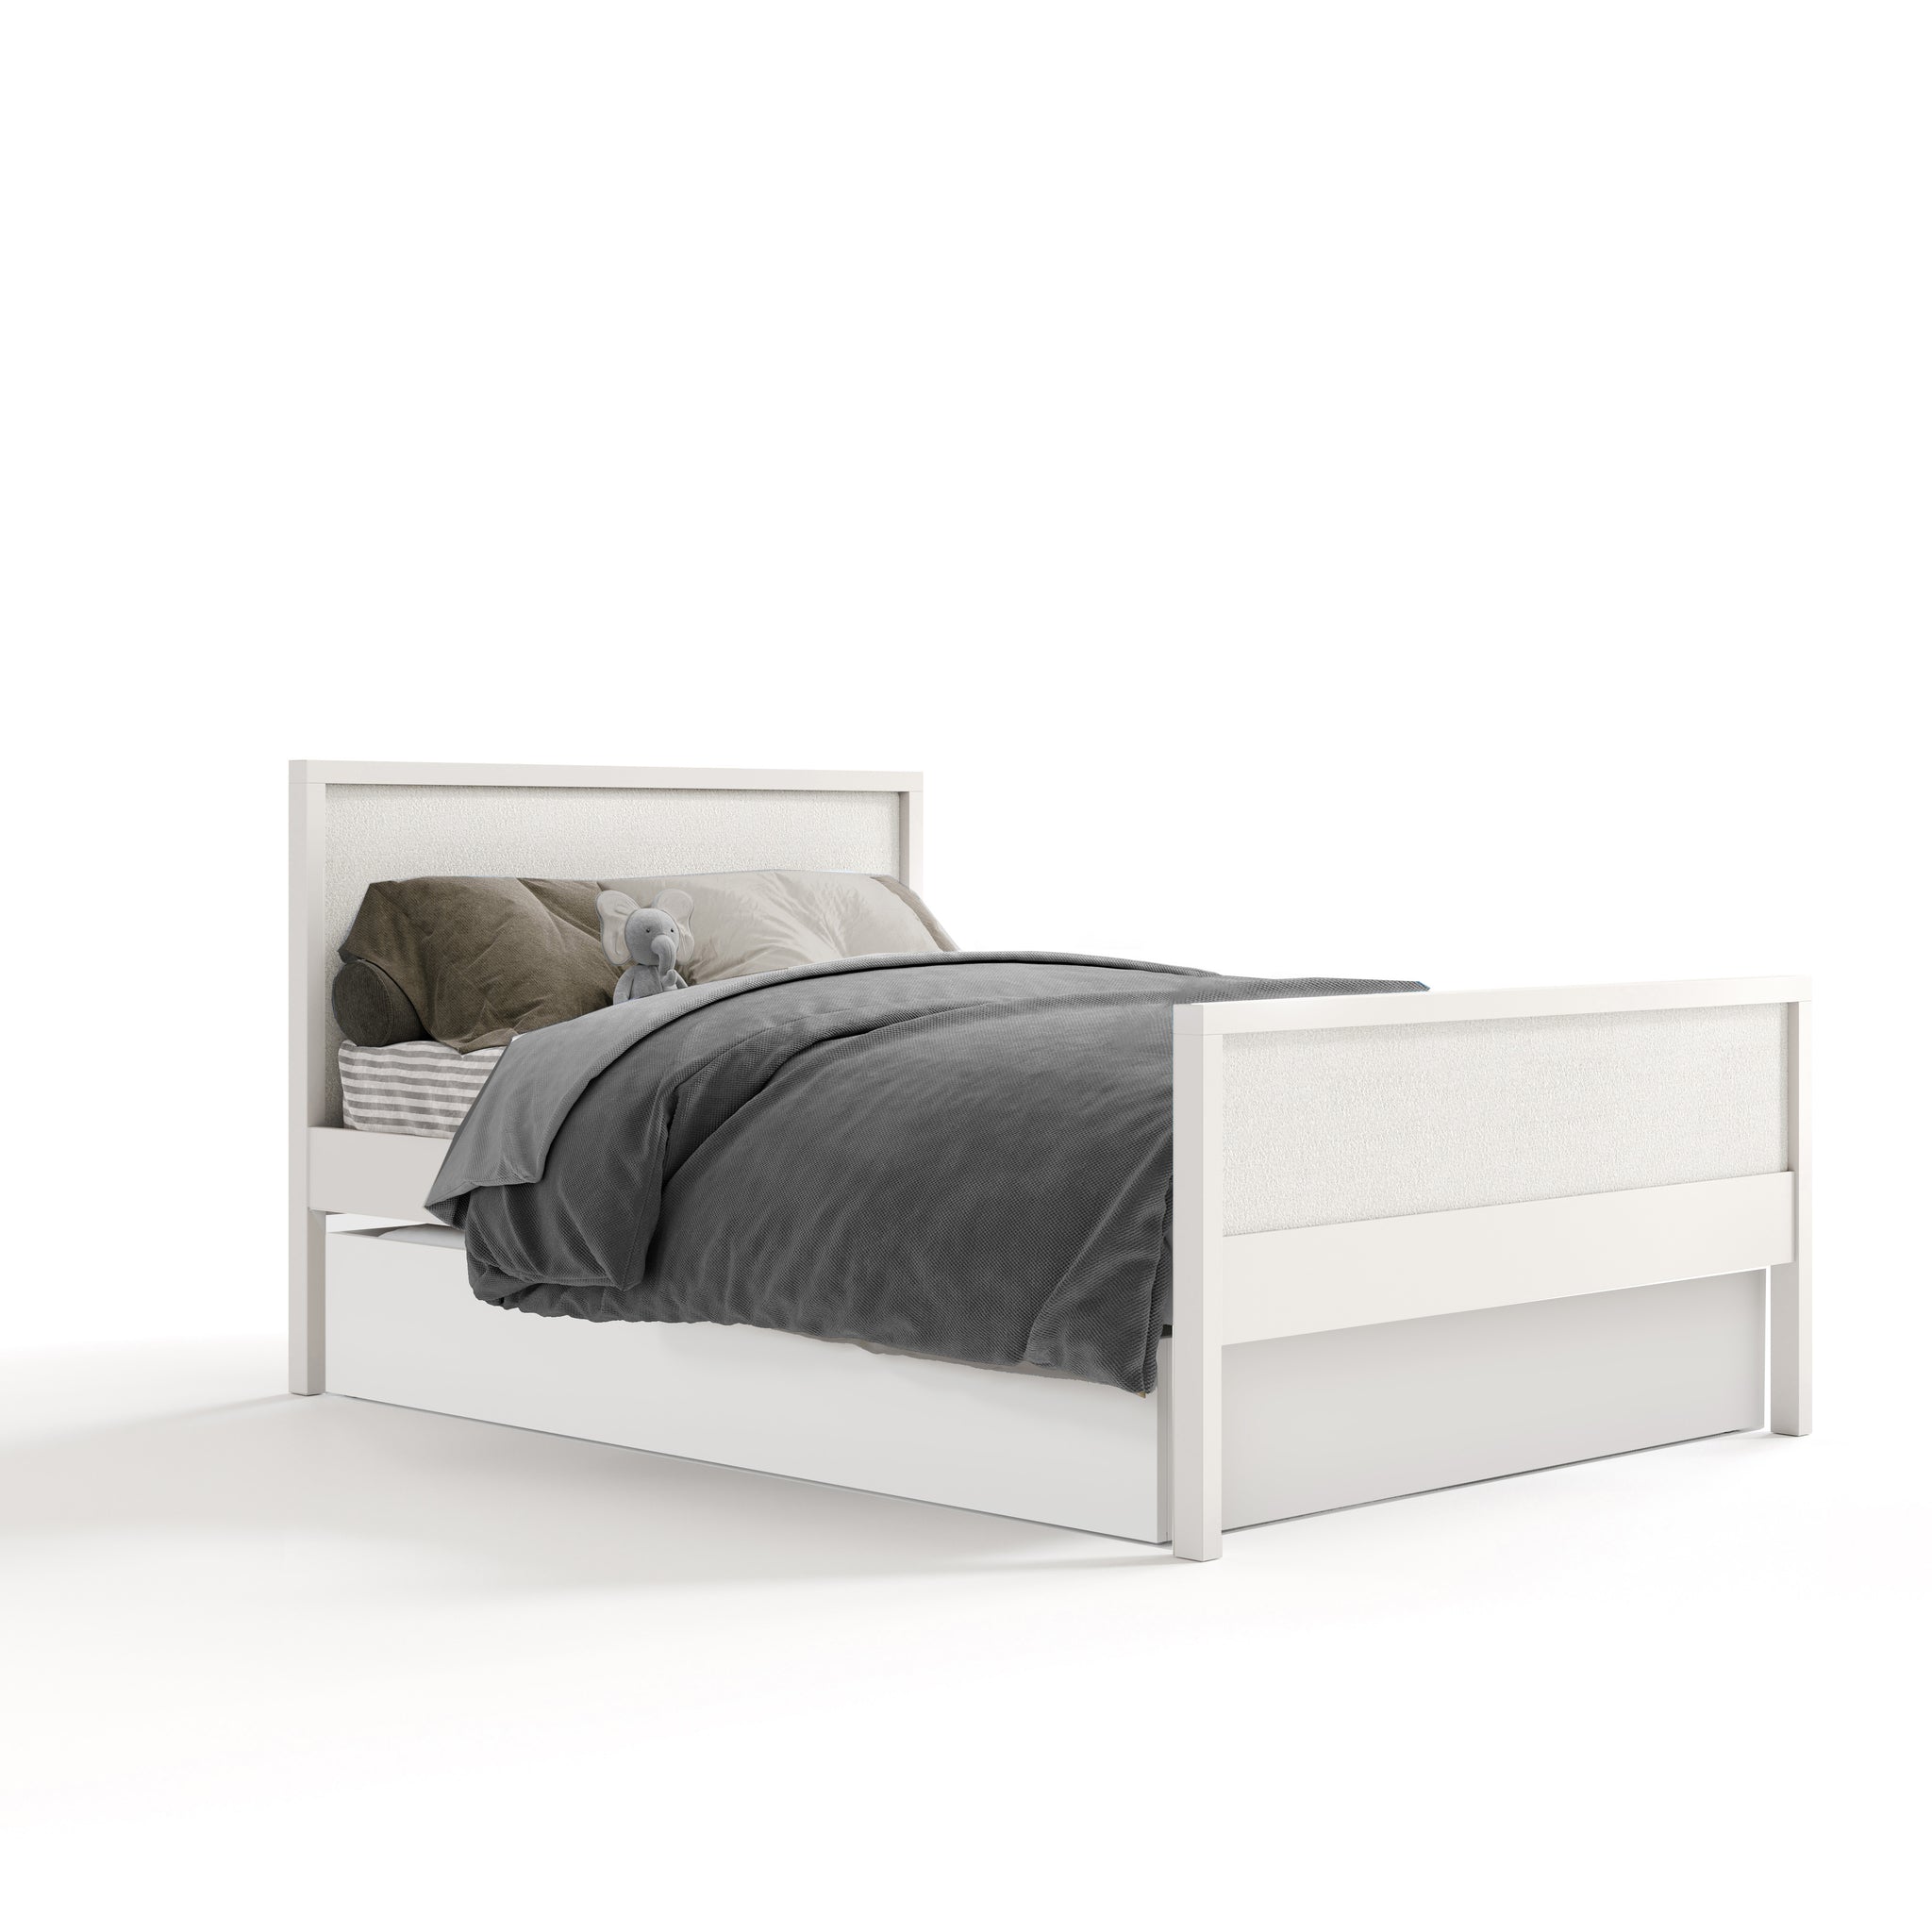 cabana bed - low footboard - white maple